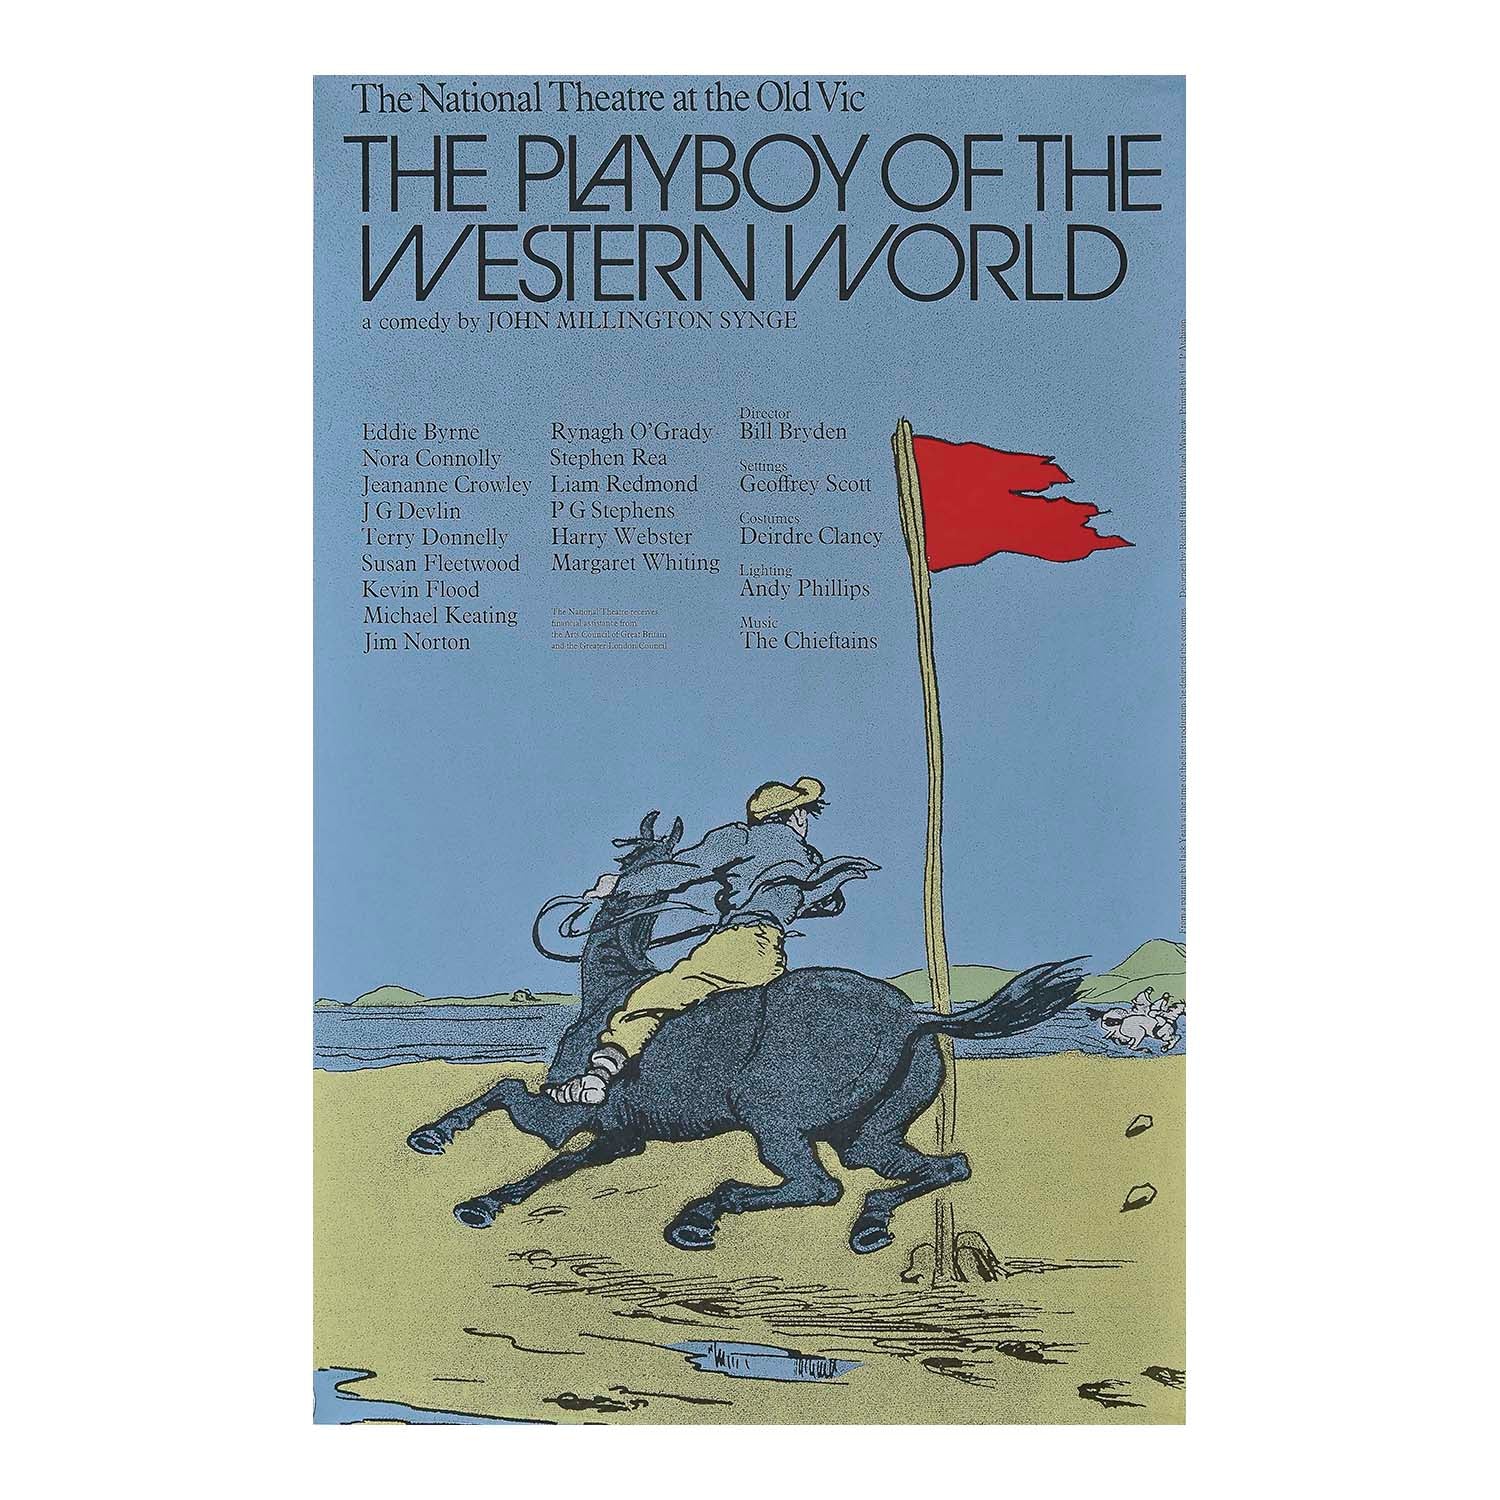 outstanding, original, theatre poster for a production of The Playboy of the Western World at the National Theatre, London, 1975, designed by Richard Bird & Michael Mayhew. The three-act play was written by Irish playwright John Millington Synge and first performed at the Abbey Theatre, Dublin, on 26 January 1907. The main image for the poster is taken from a painting by Irish artist Jack Yeats which was used for the first production.